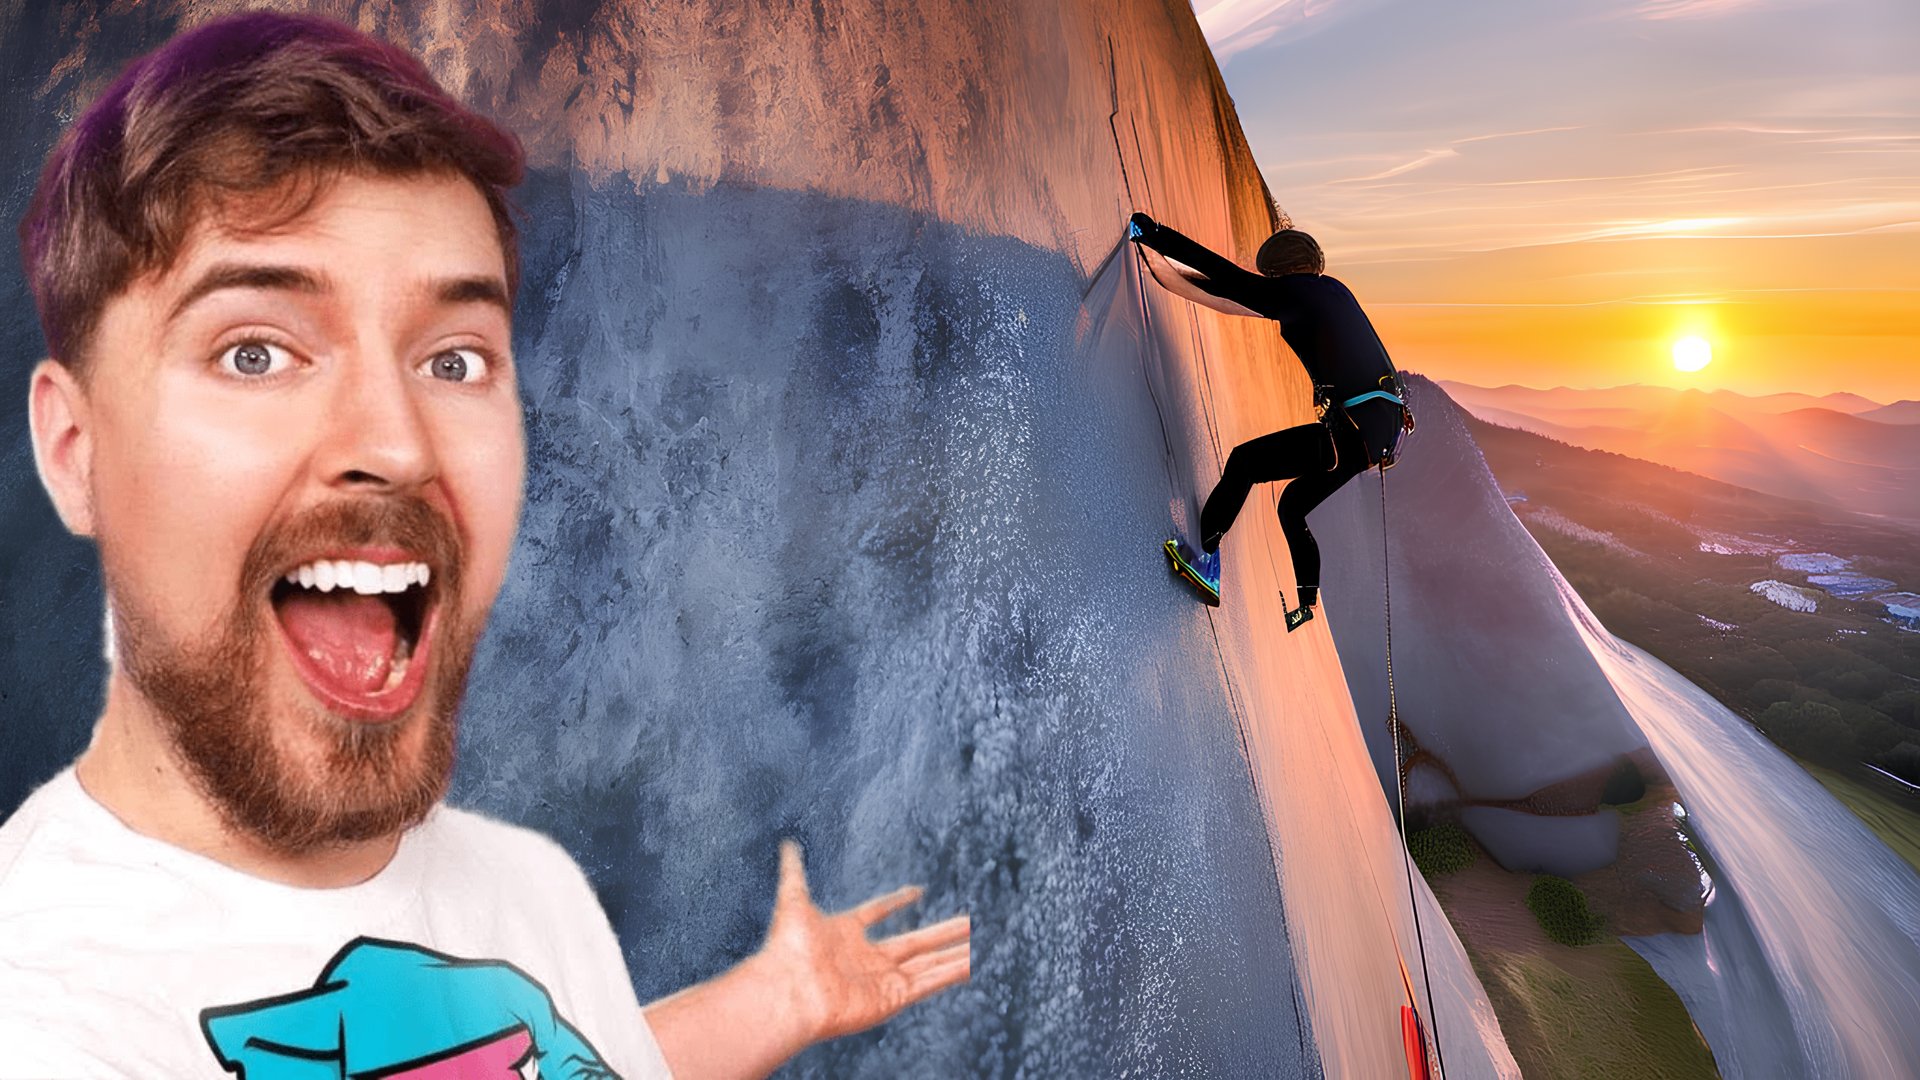 First one to climb mount everest gets to keep it! Thumbnail